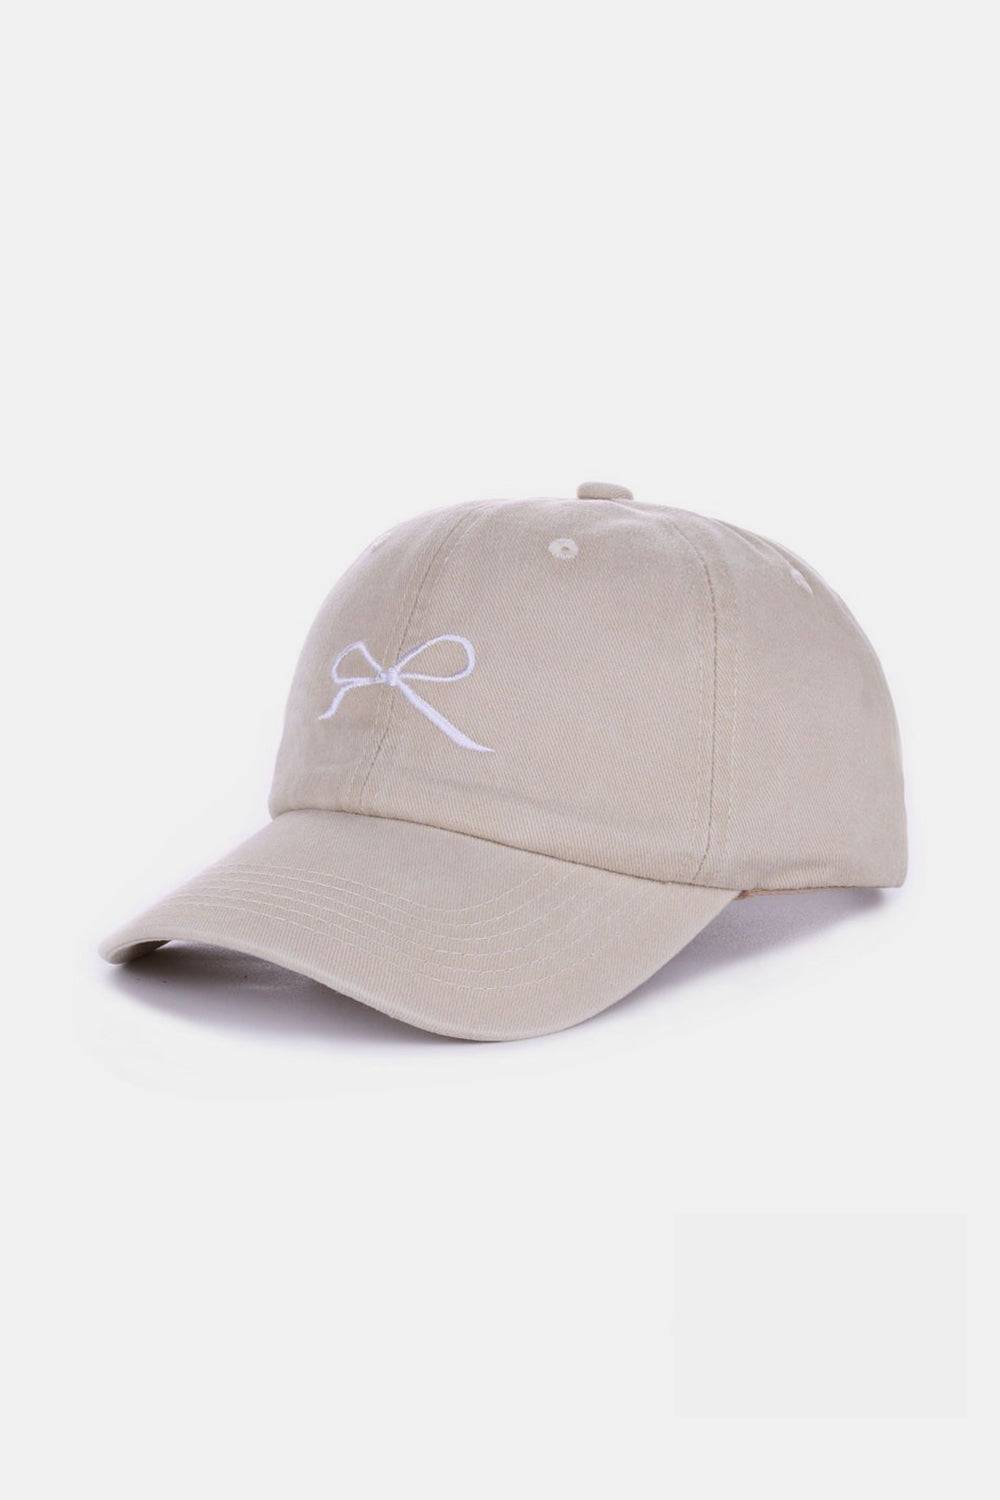 a baseball cap with a bow on the front